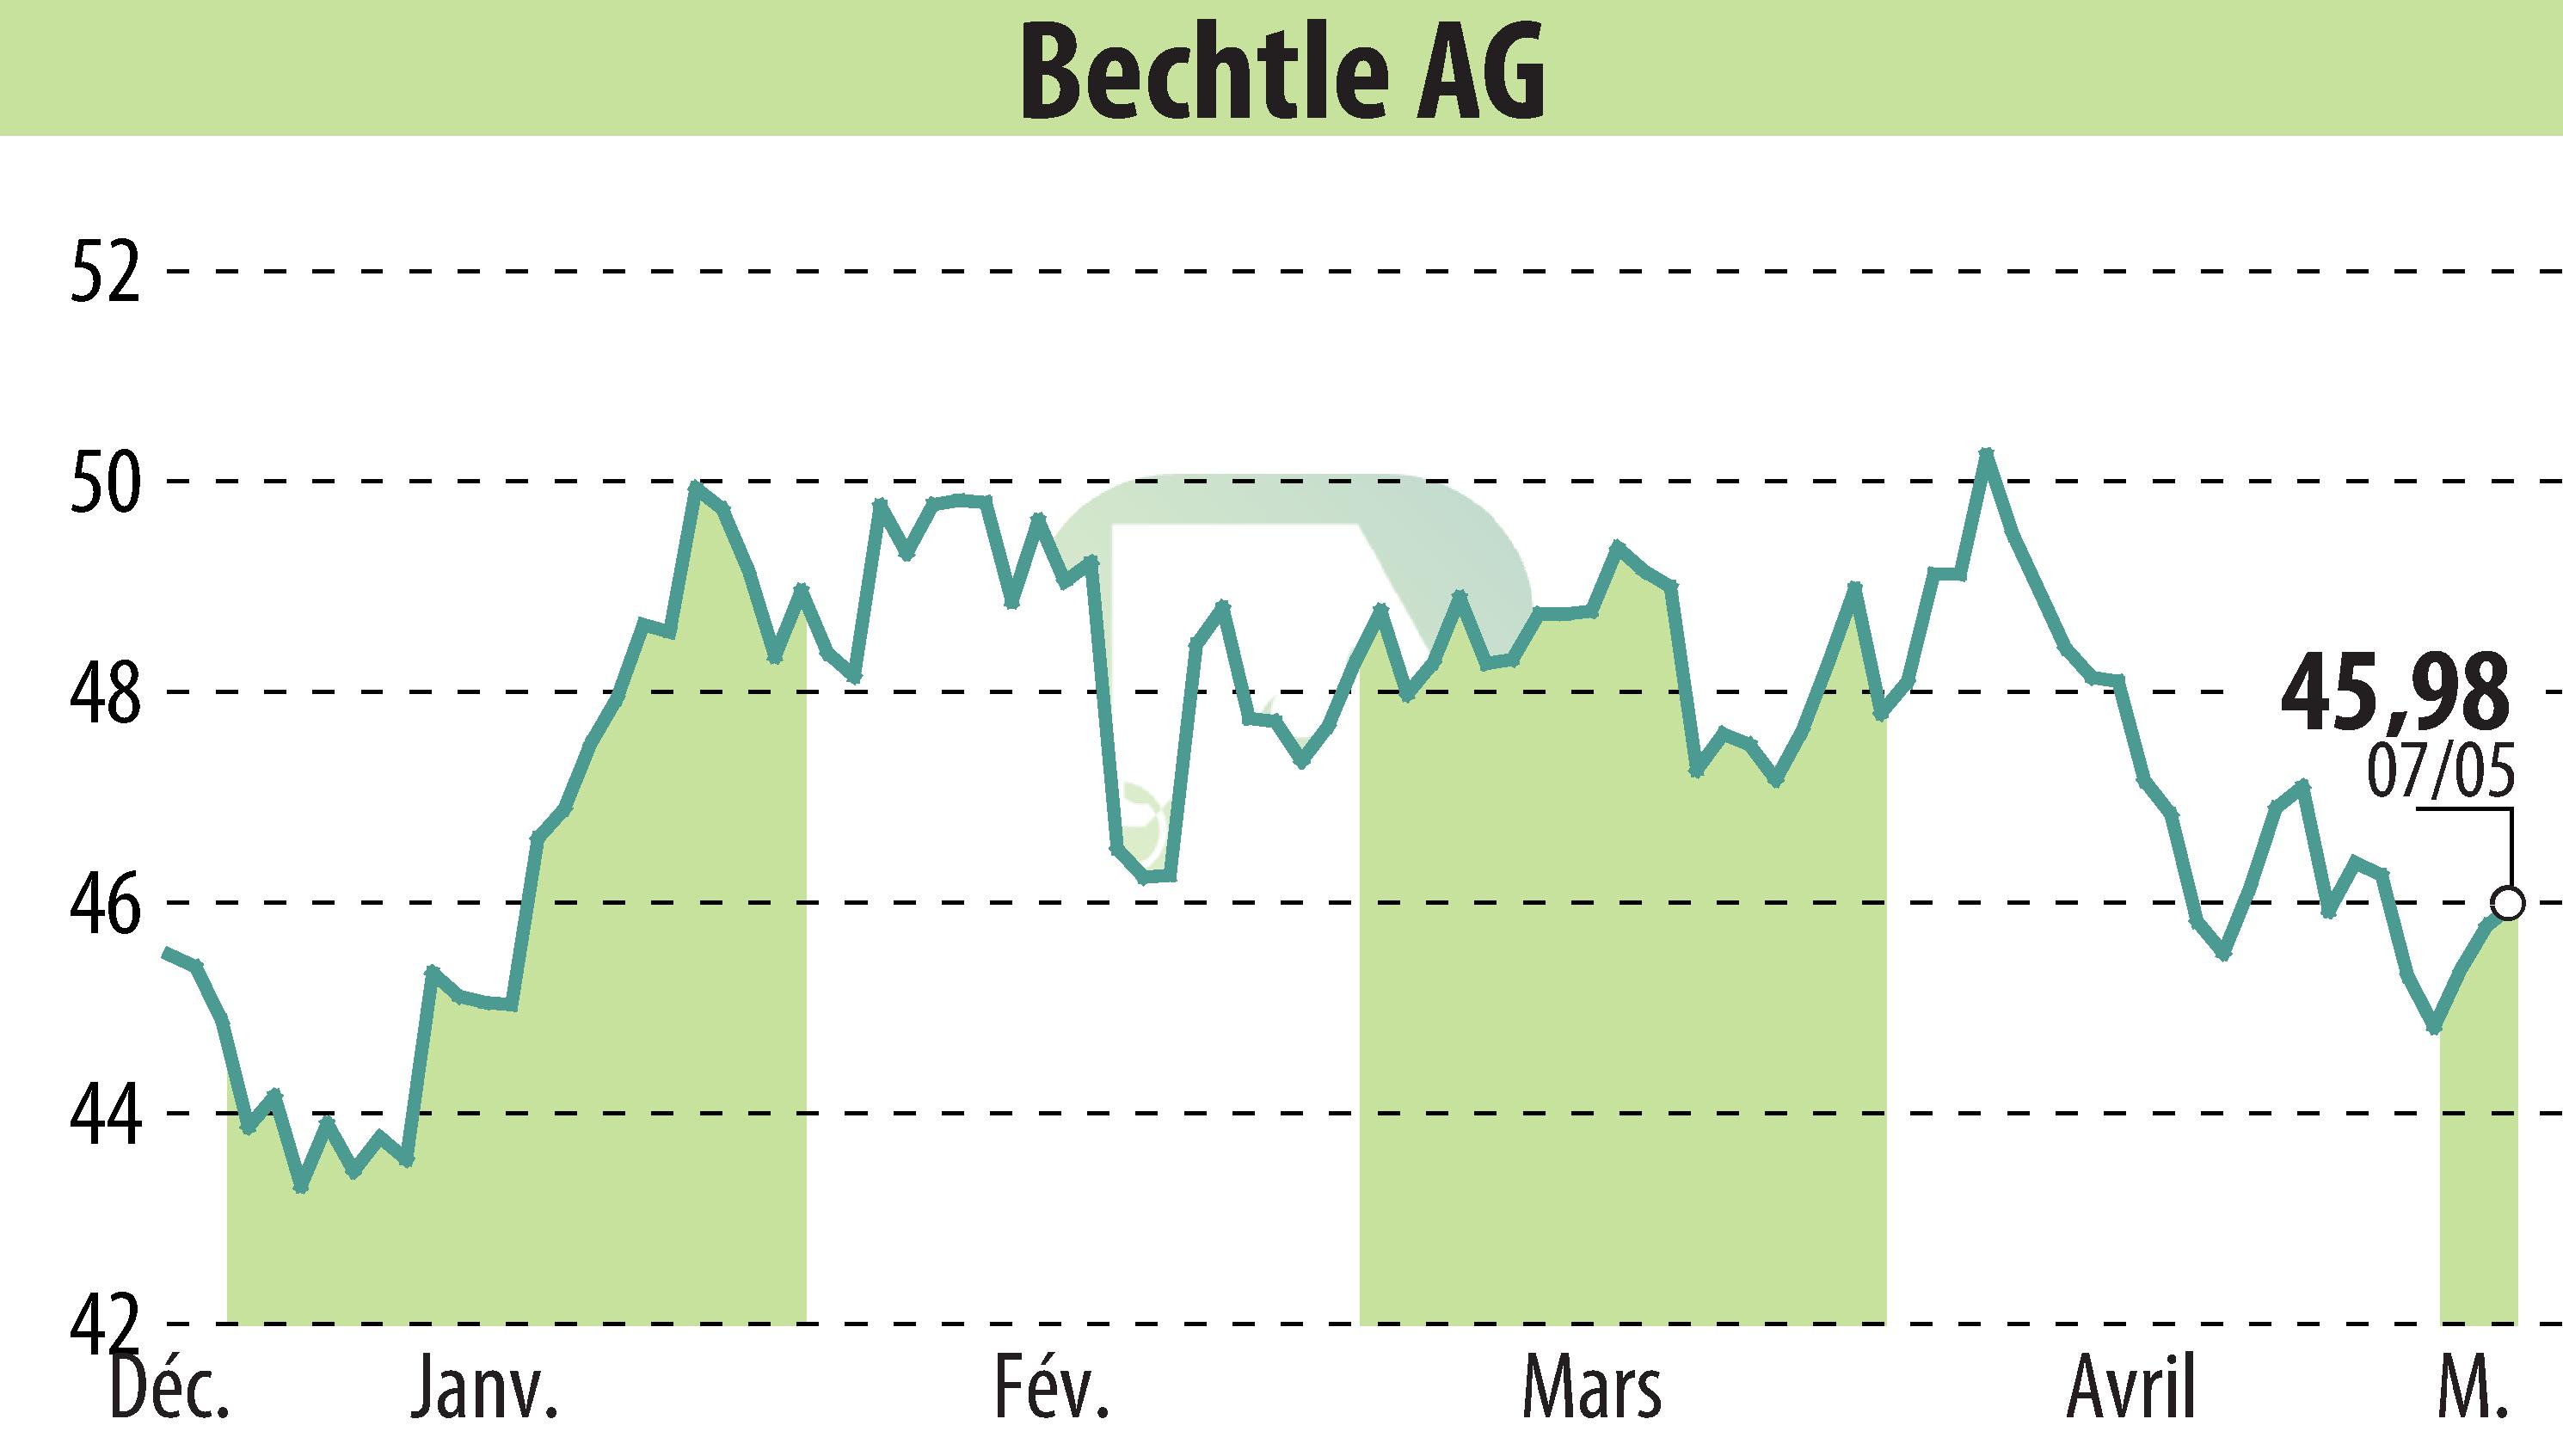 Stock price chart of Bechtle AG (EBR:BC8) showing fluctuations.